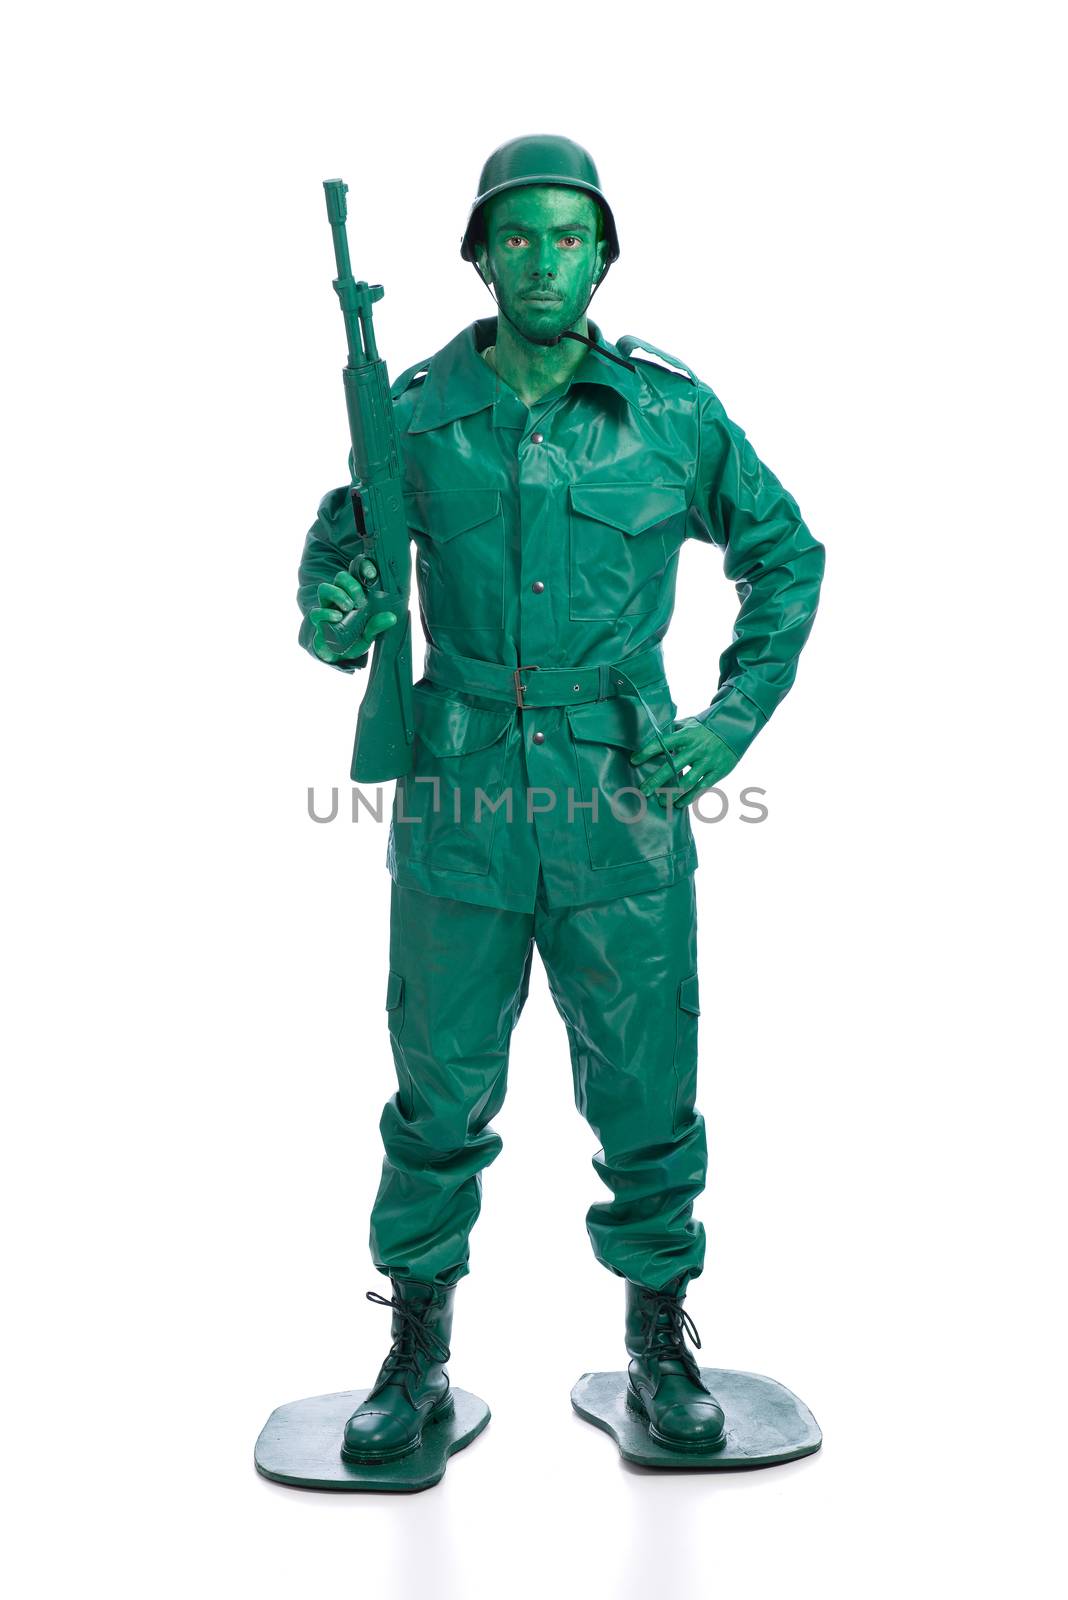 Man on a green toy soldier costume standing with riffle isolated on white background.